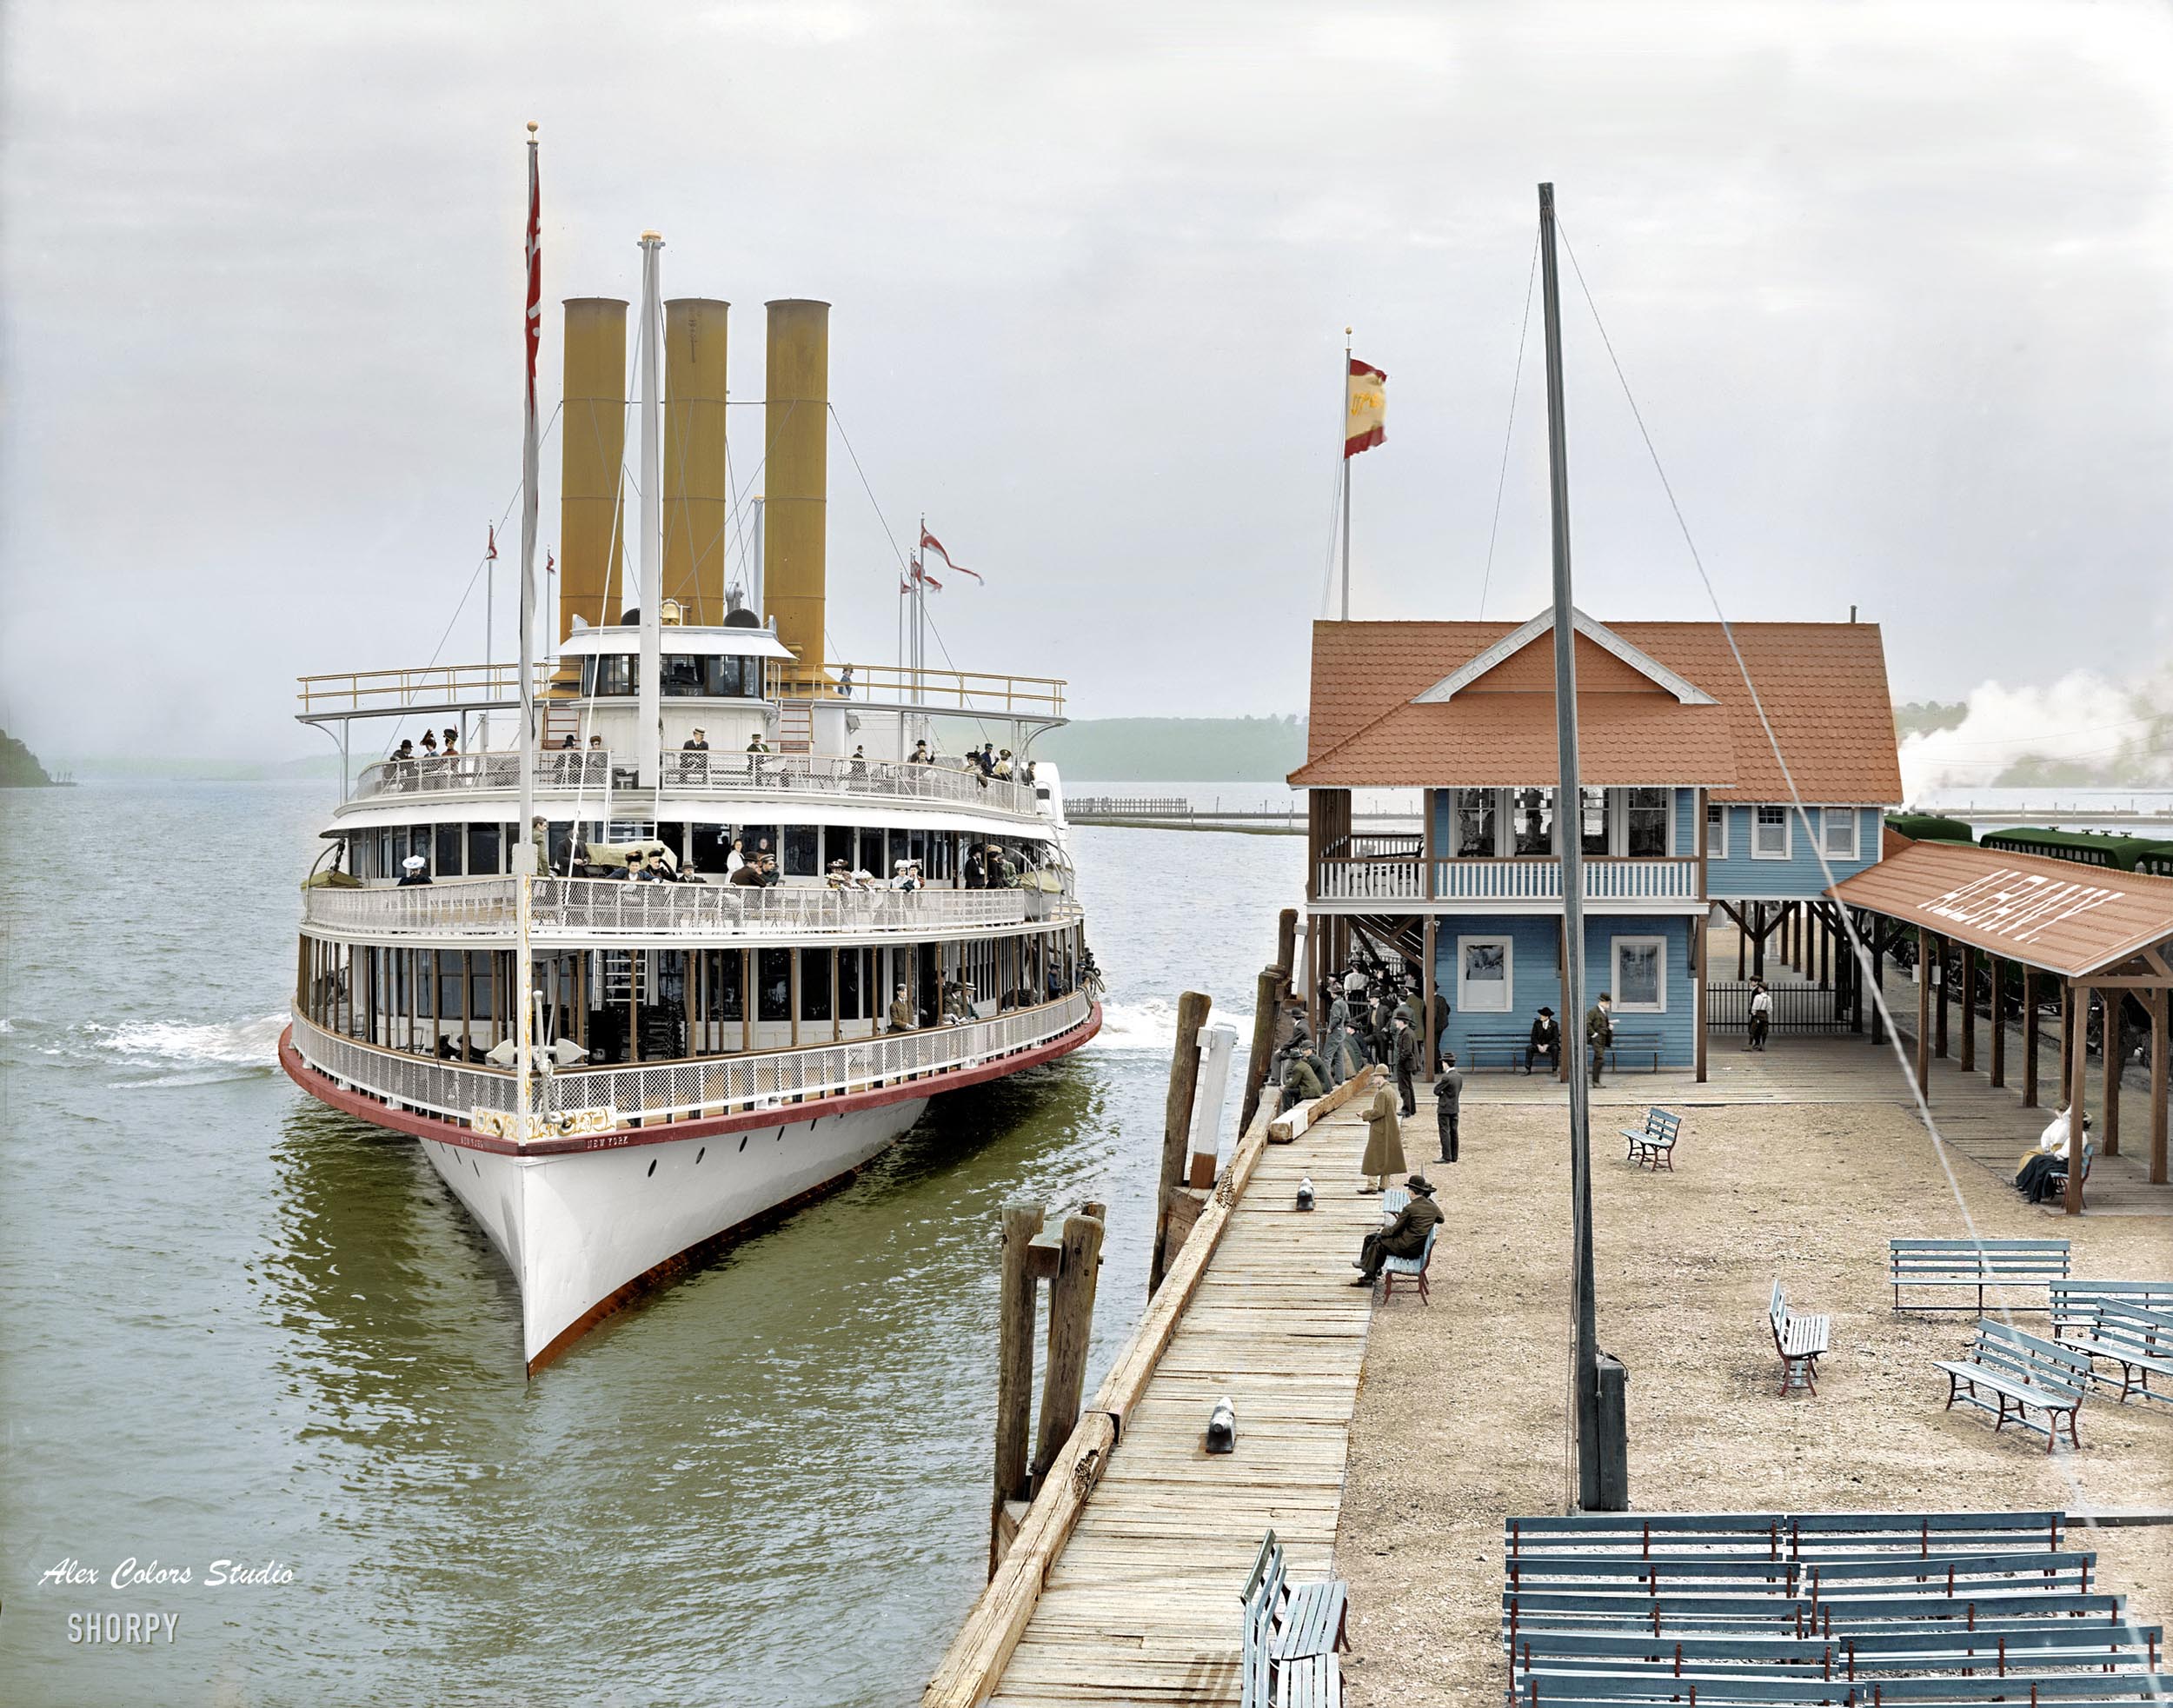 Colorized version of River Cruise, 1906. "Steamer New York on the Hudson. Boat landing at Kingston Point." Detroit Publishing Company, circa 1906. Colorized by Alexandr Khulio (Alex Wolf).
